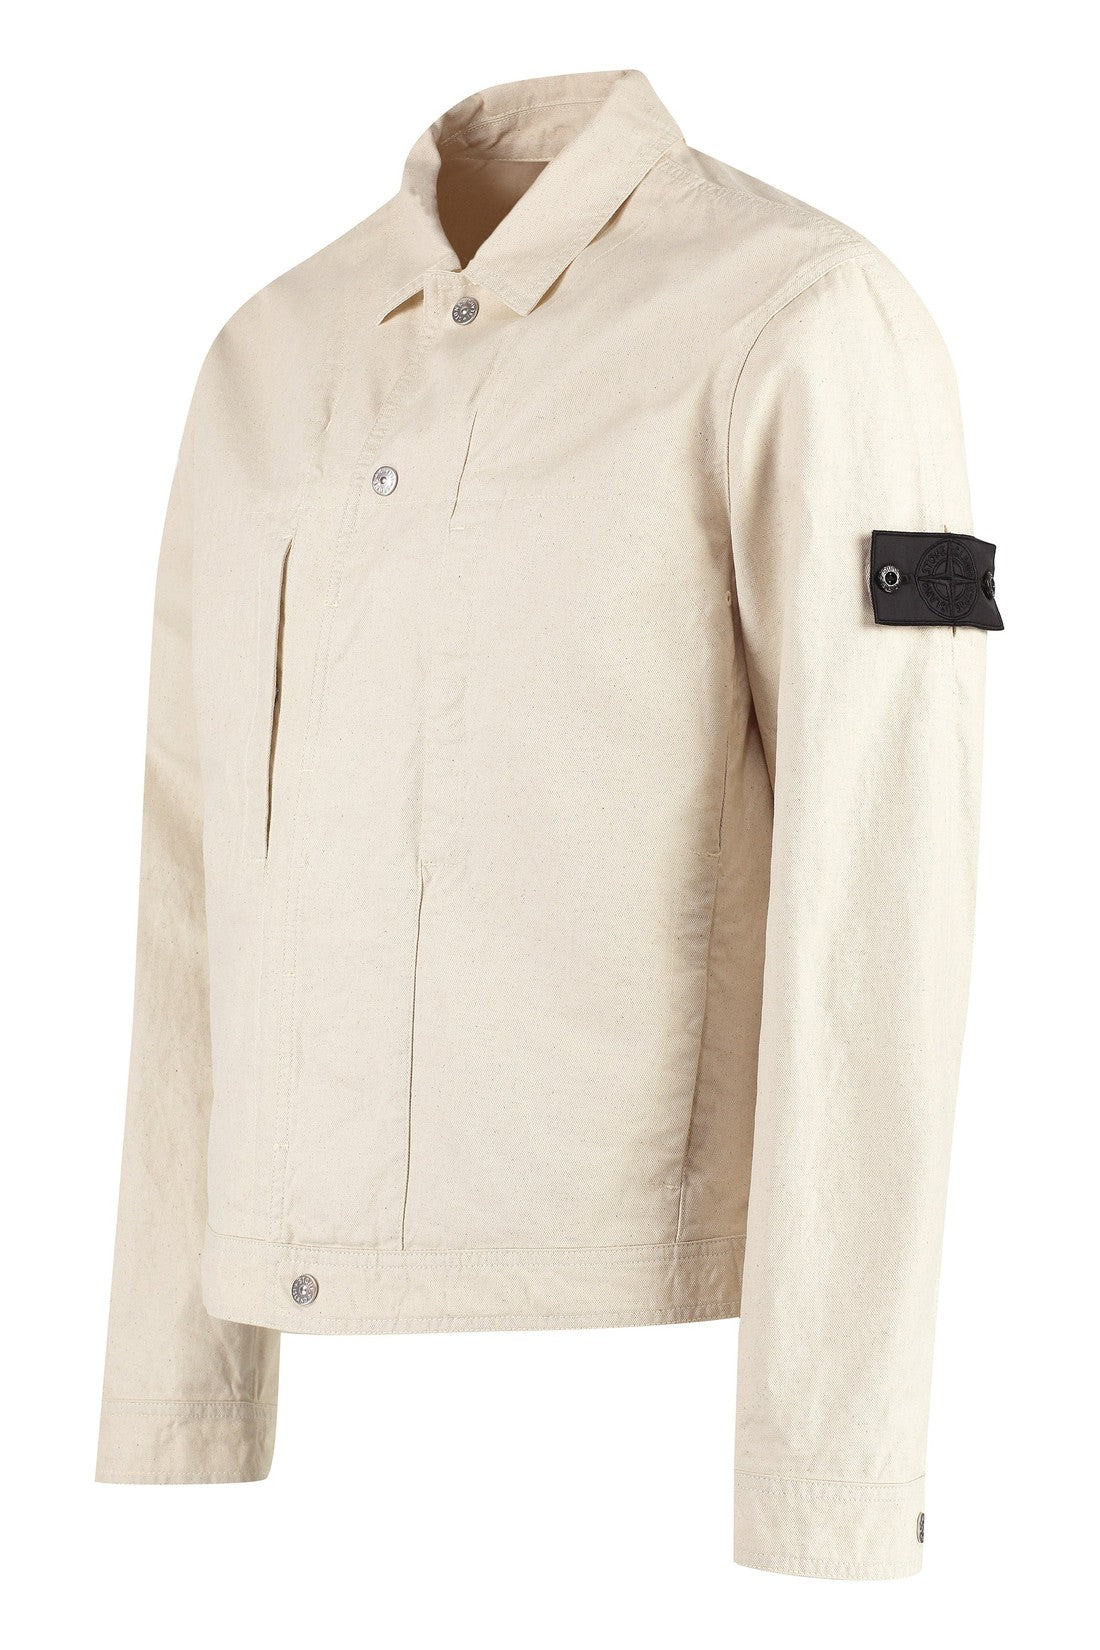 Stone Island Shadow Project-OUTLET-SALE-Trucker cotton overshirt-ARCHIVIST